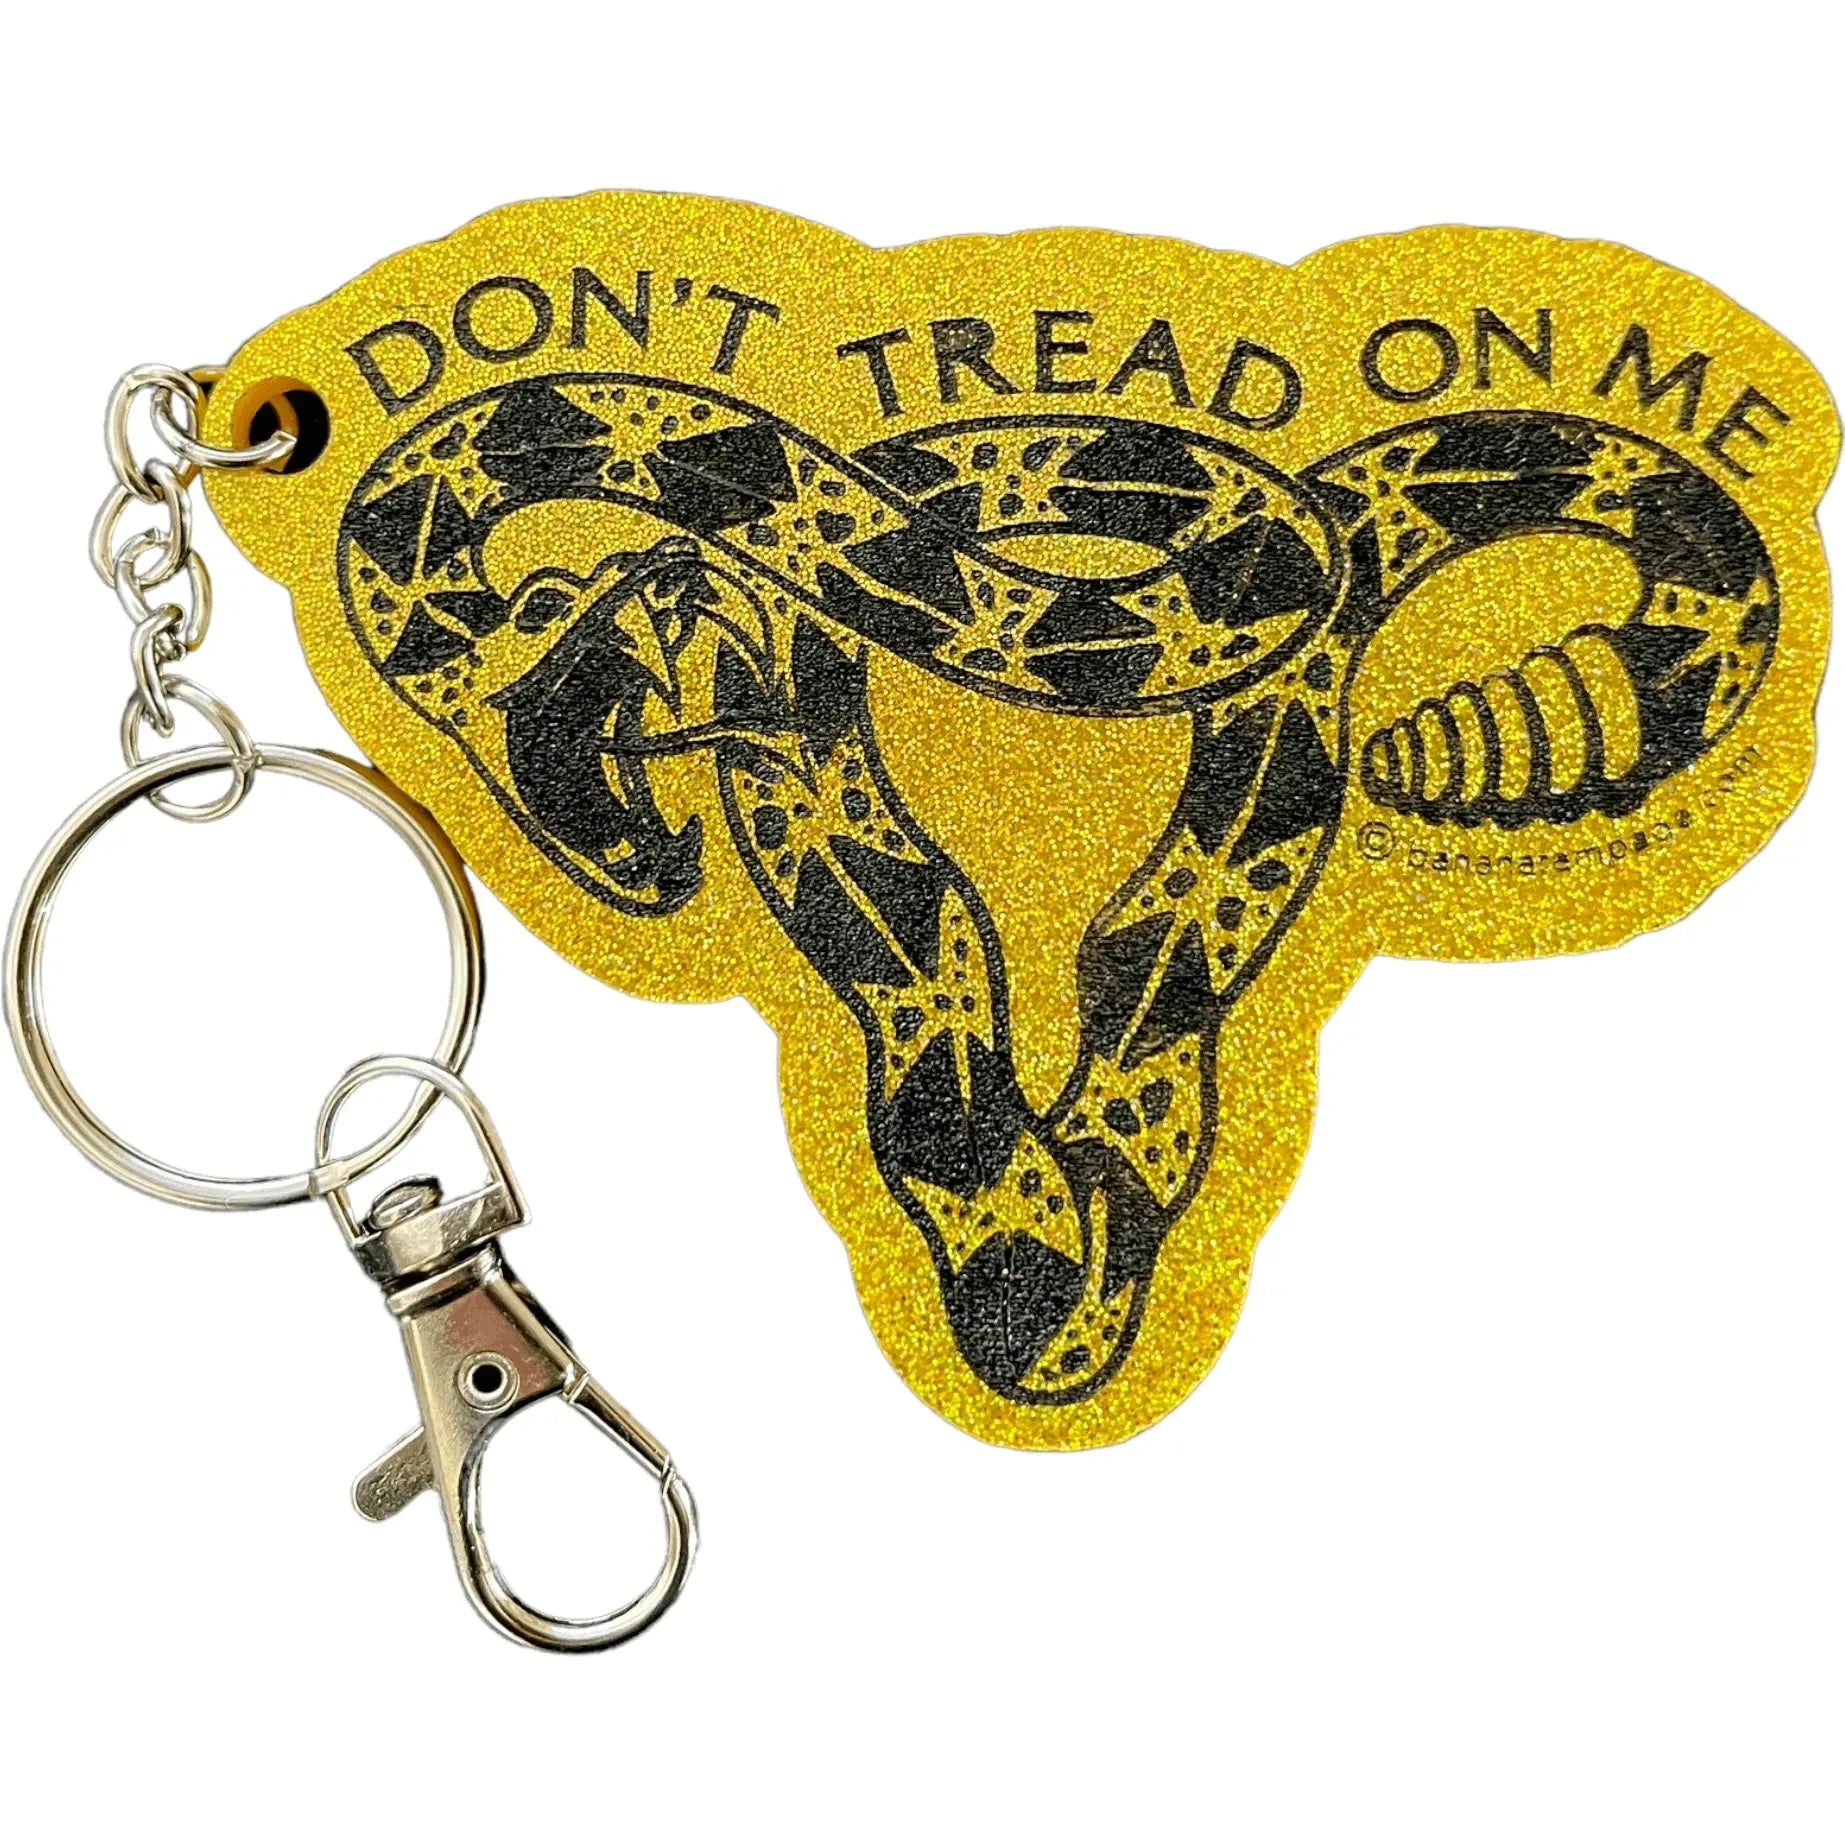 Rattlesnake Uterus don’t tread on me yellow glitter keychain supporting women’s healthcare, trans rights at Rebel Girl Rampage